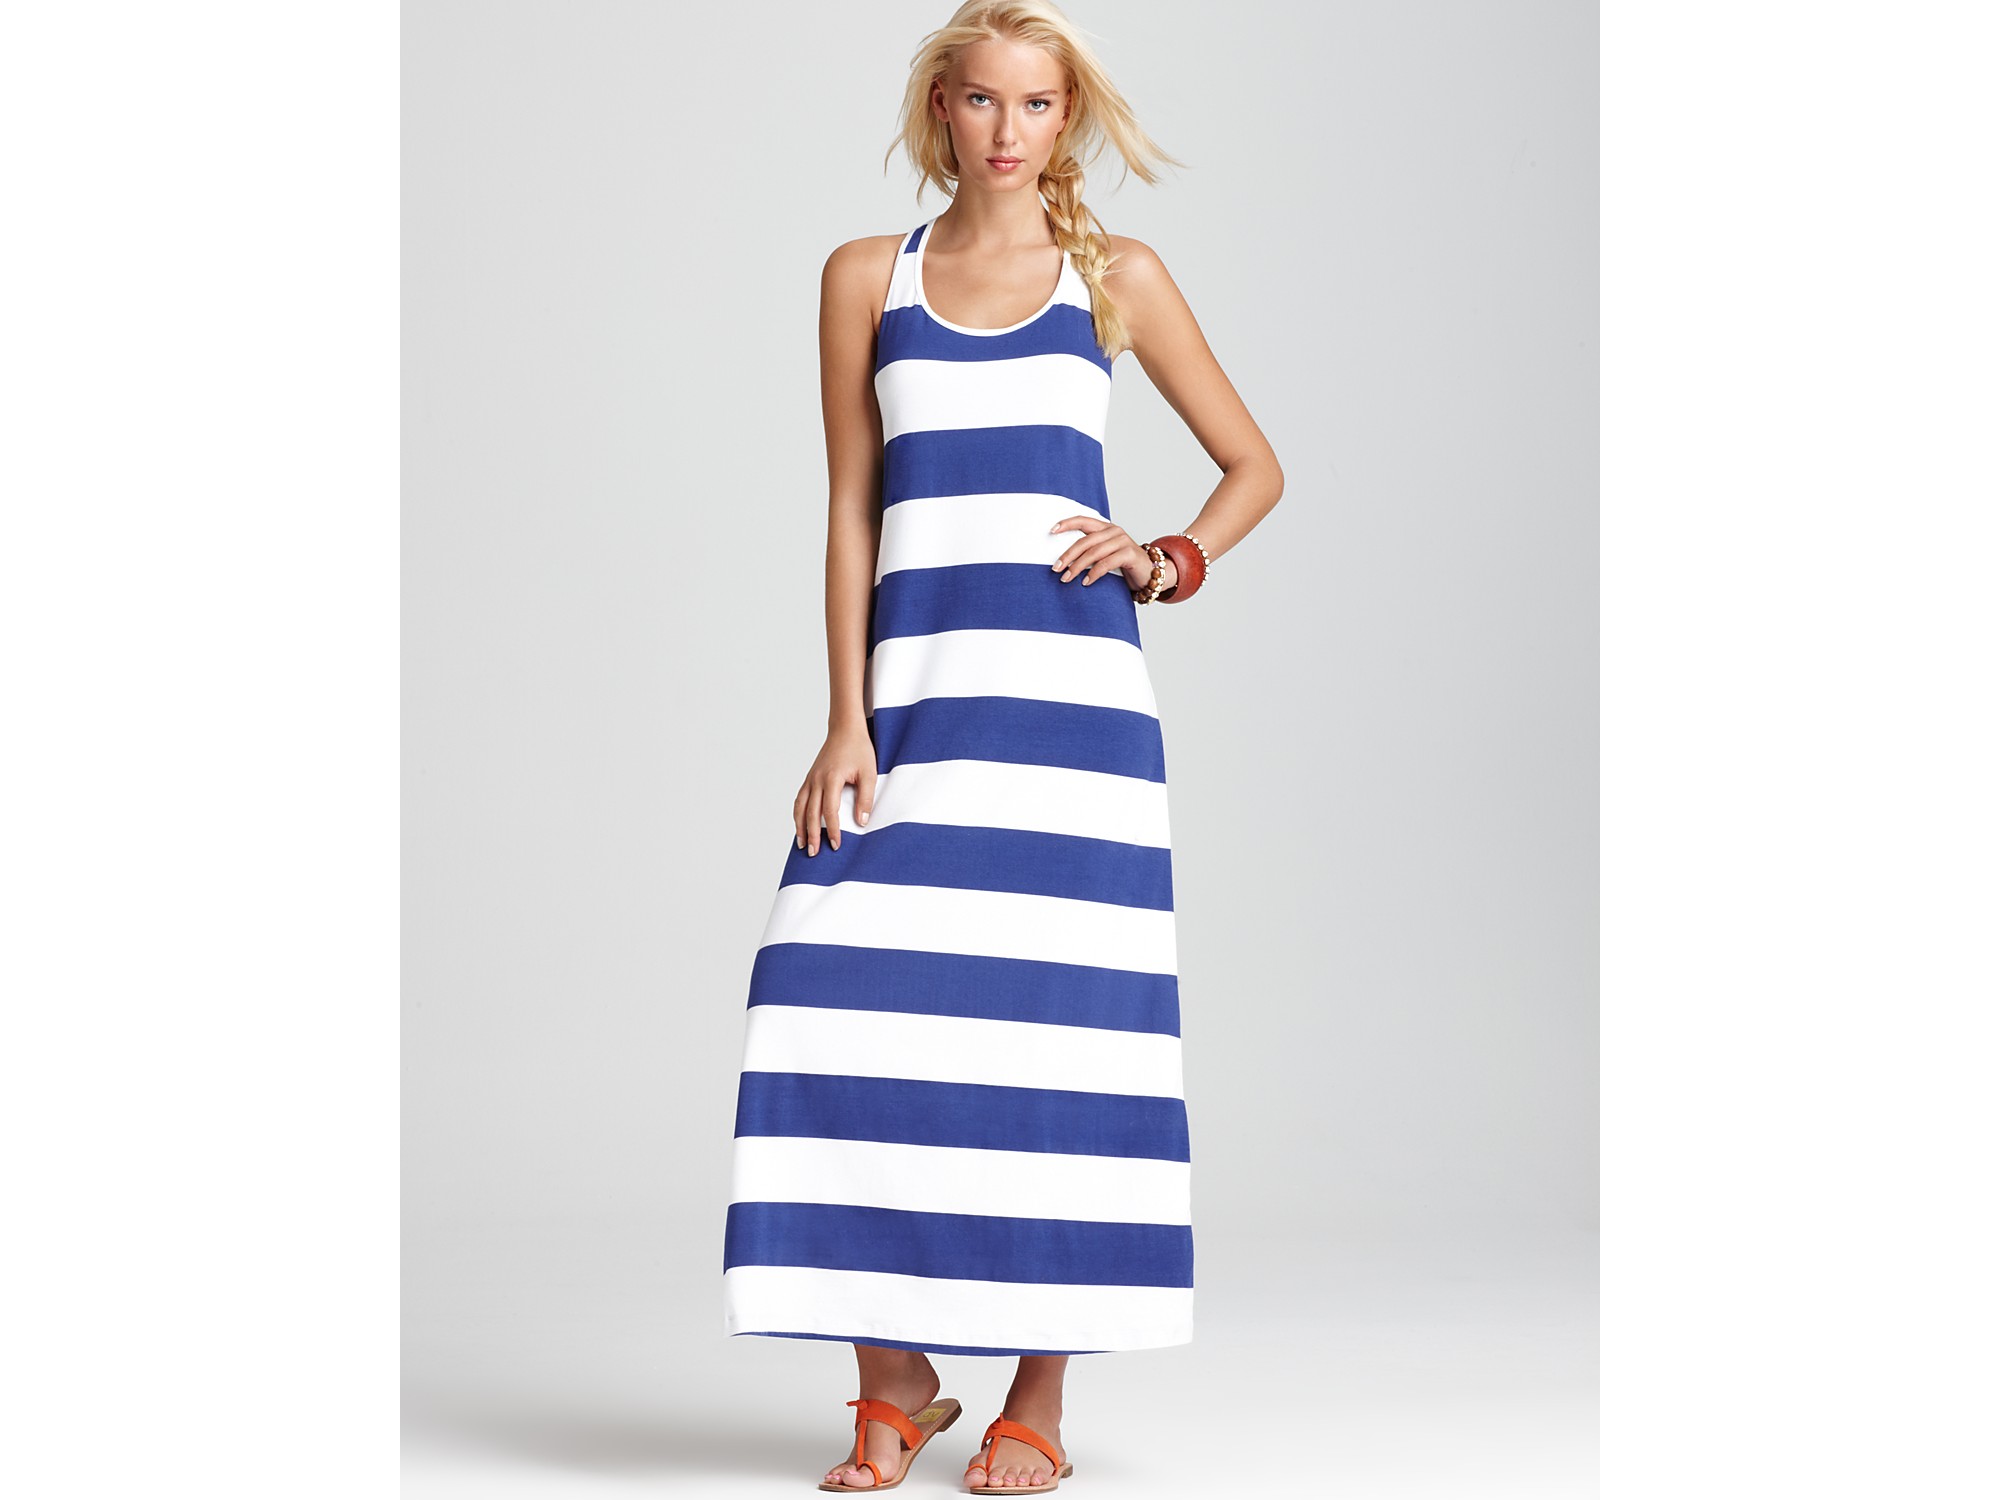 Lyst - Tommy Bahama Striped Maxi Dress in Blue